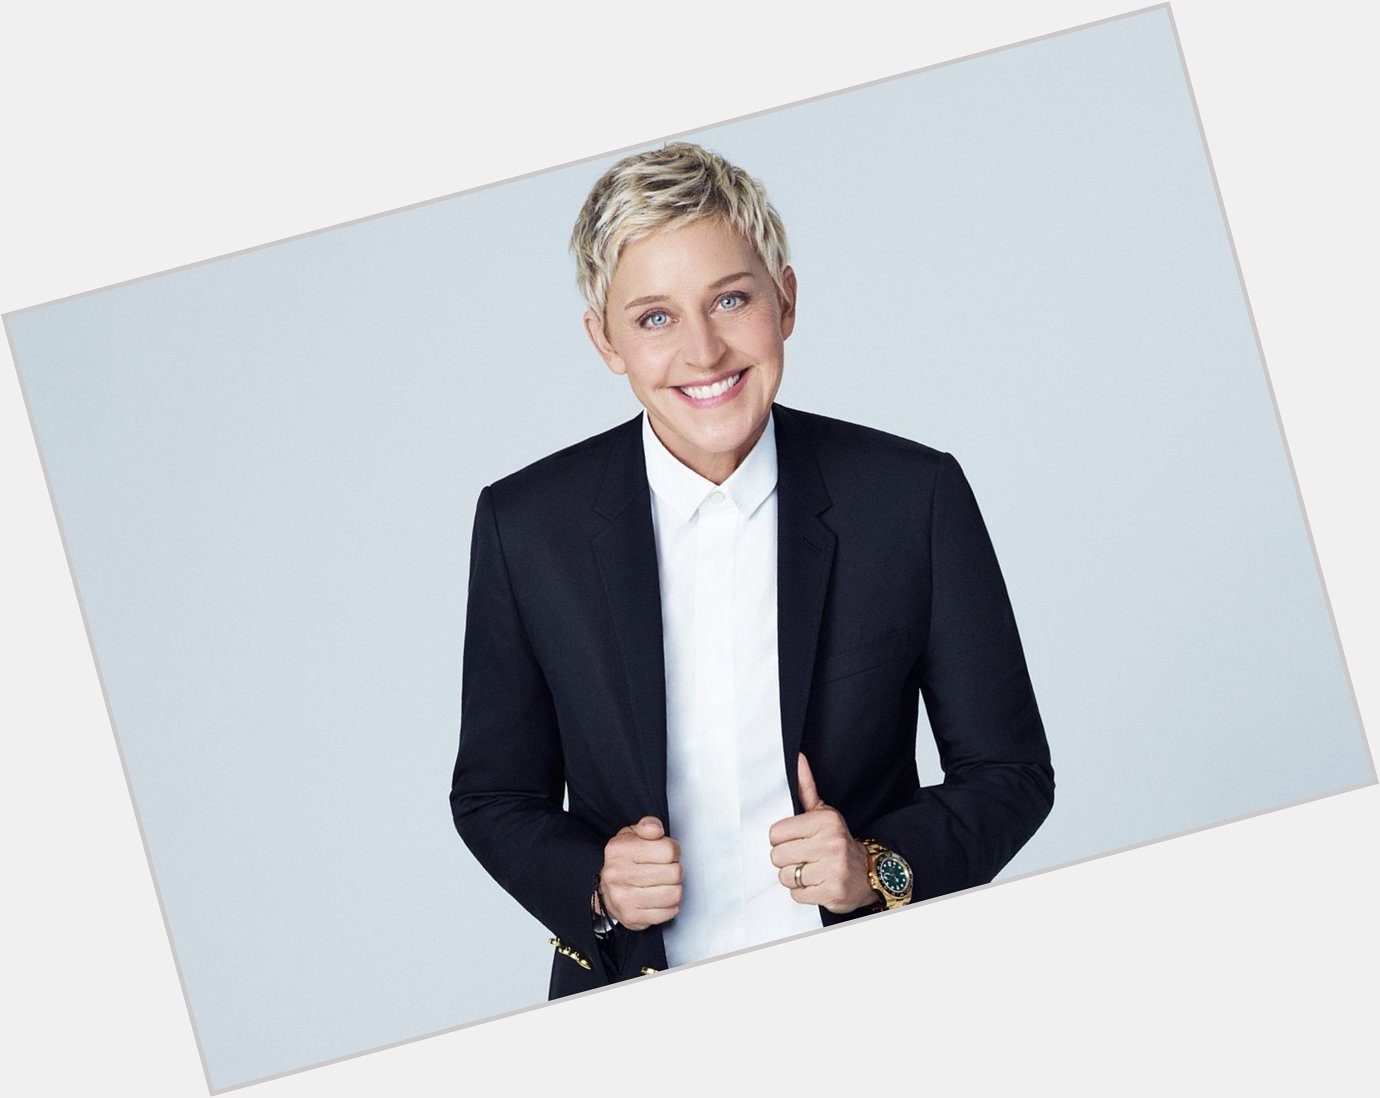 Today is Ellen Degeneres s Birthday! Everyone wish her a Happy Birthday! Who is a fan of ? 